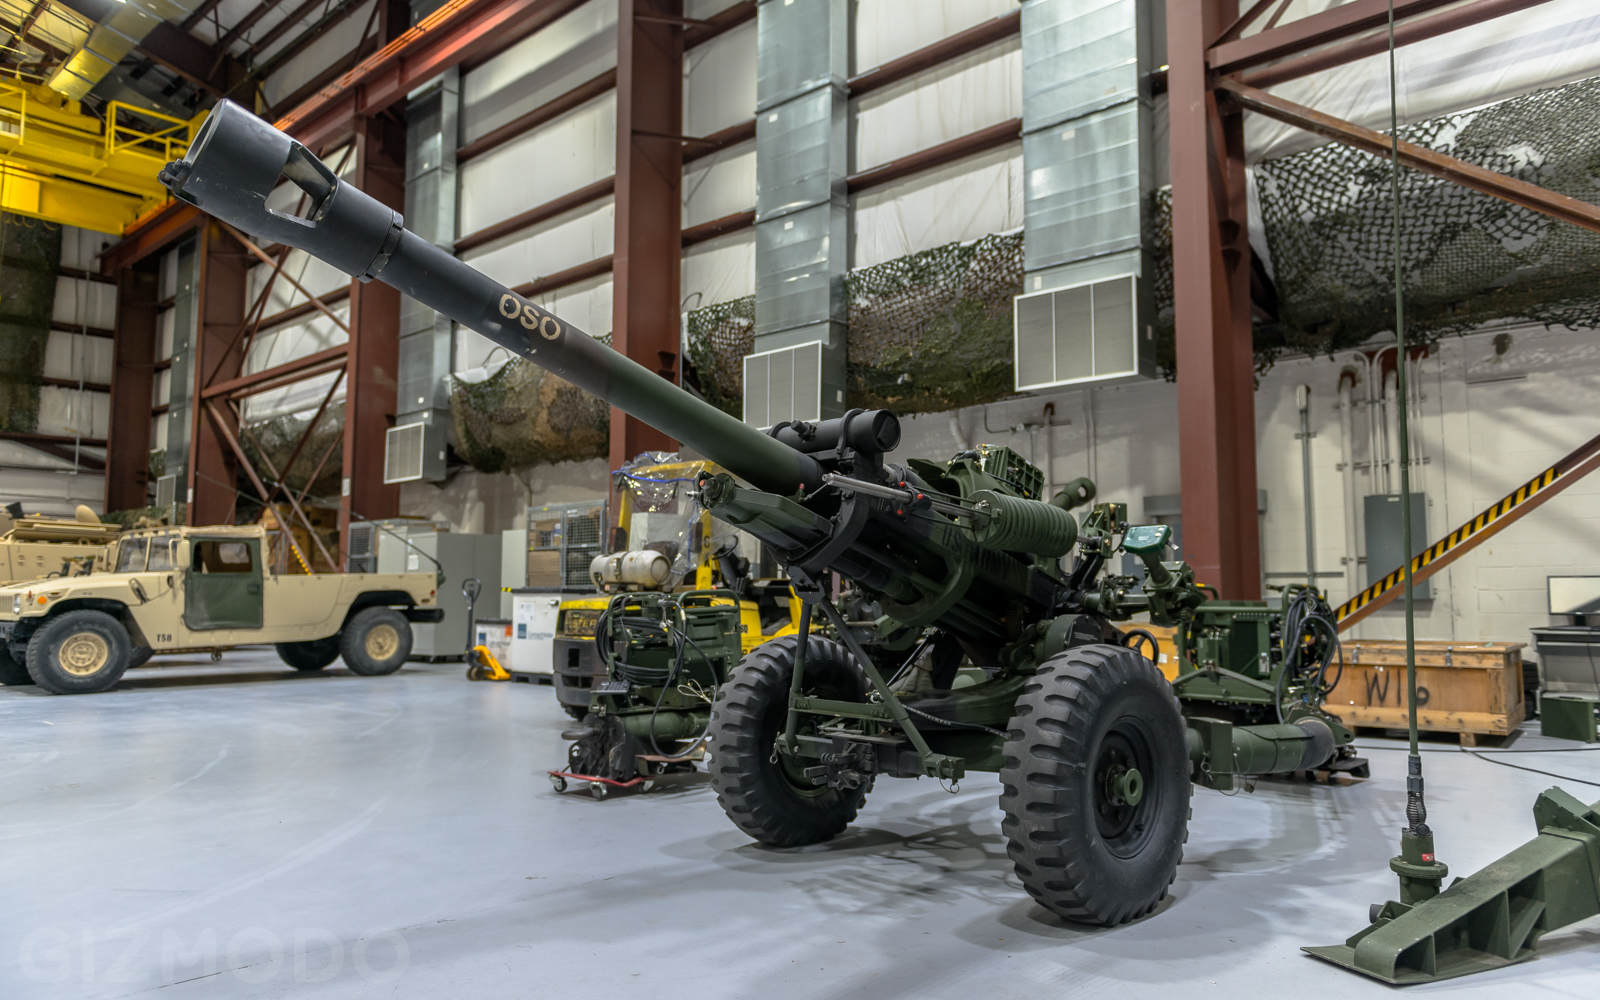 Step Inside The US Military’s Advanced Weapons R&D Mini-City